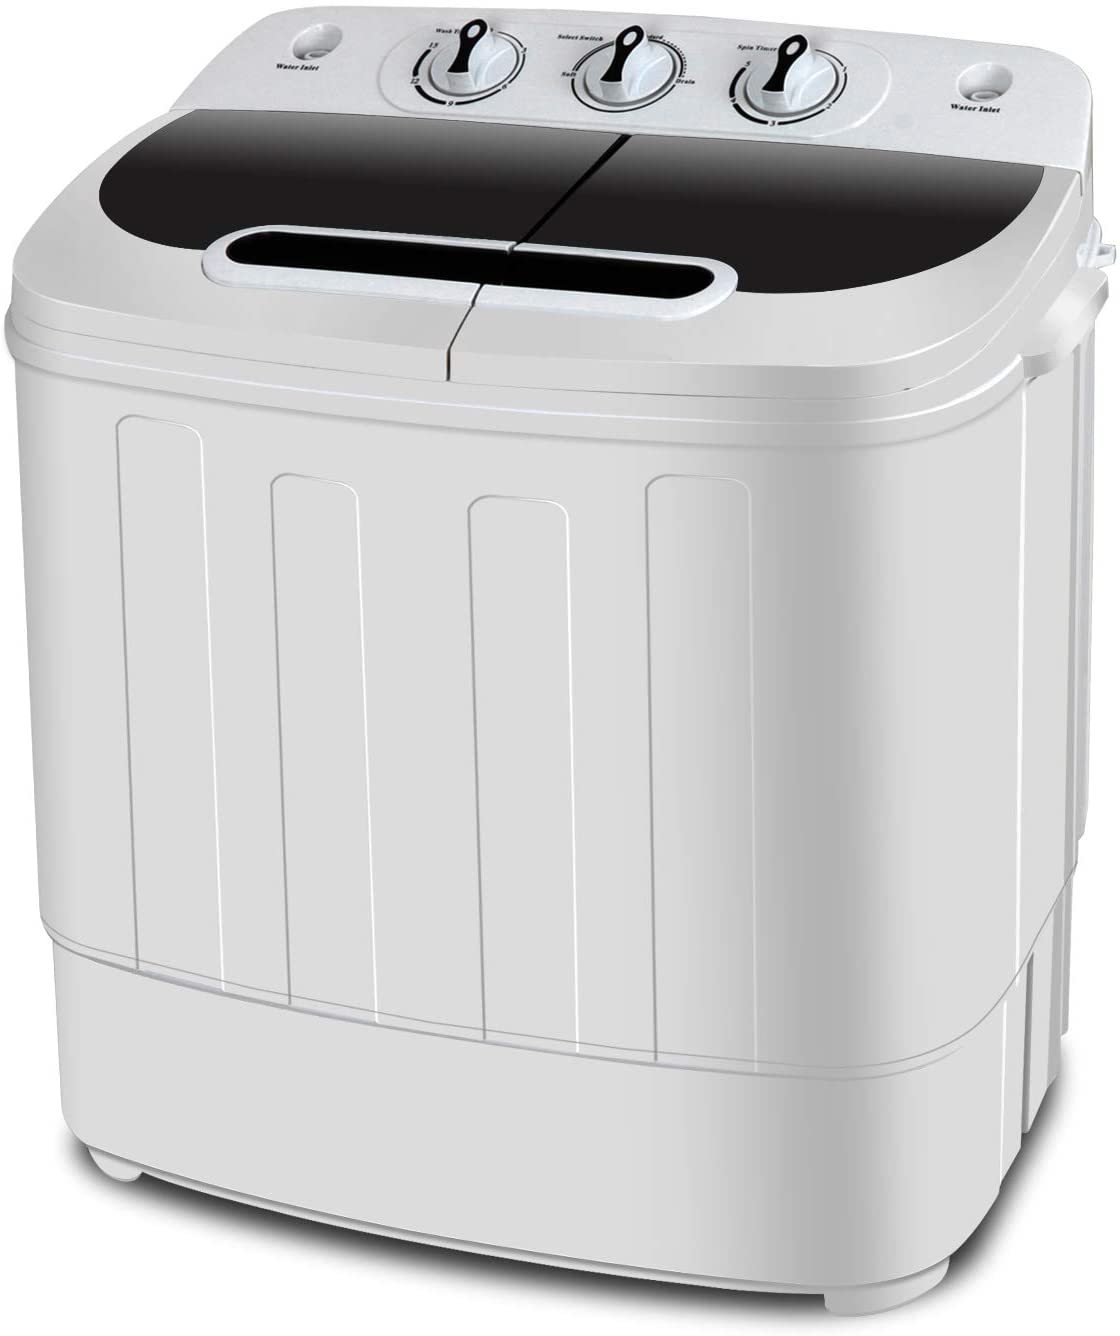 SUPER DEAL Time Saving Twin Tub Portable Washing Machine For Apartments